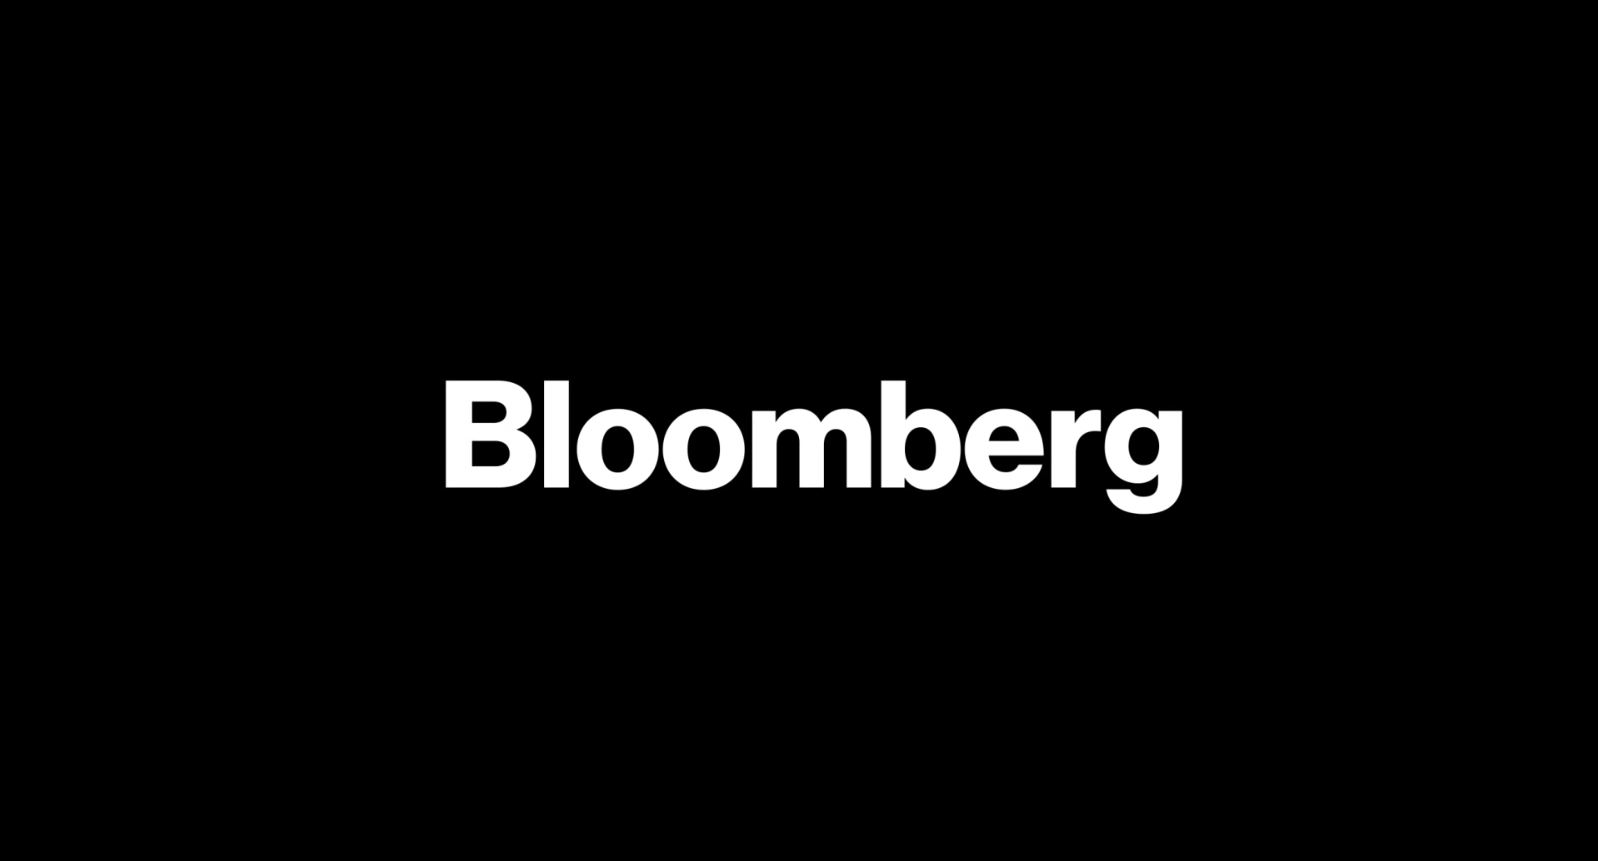  bloomberg  commodity outlook    